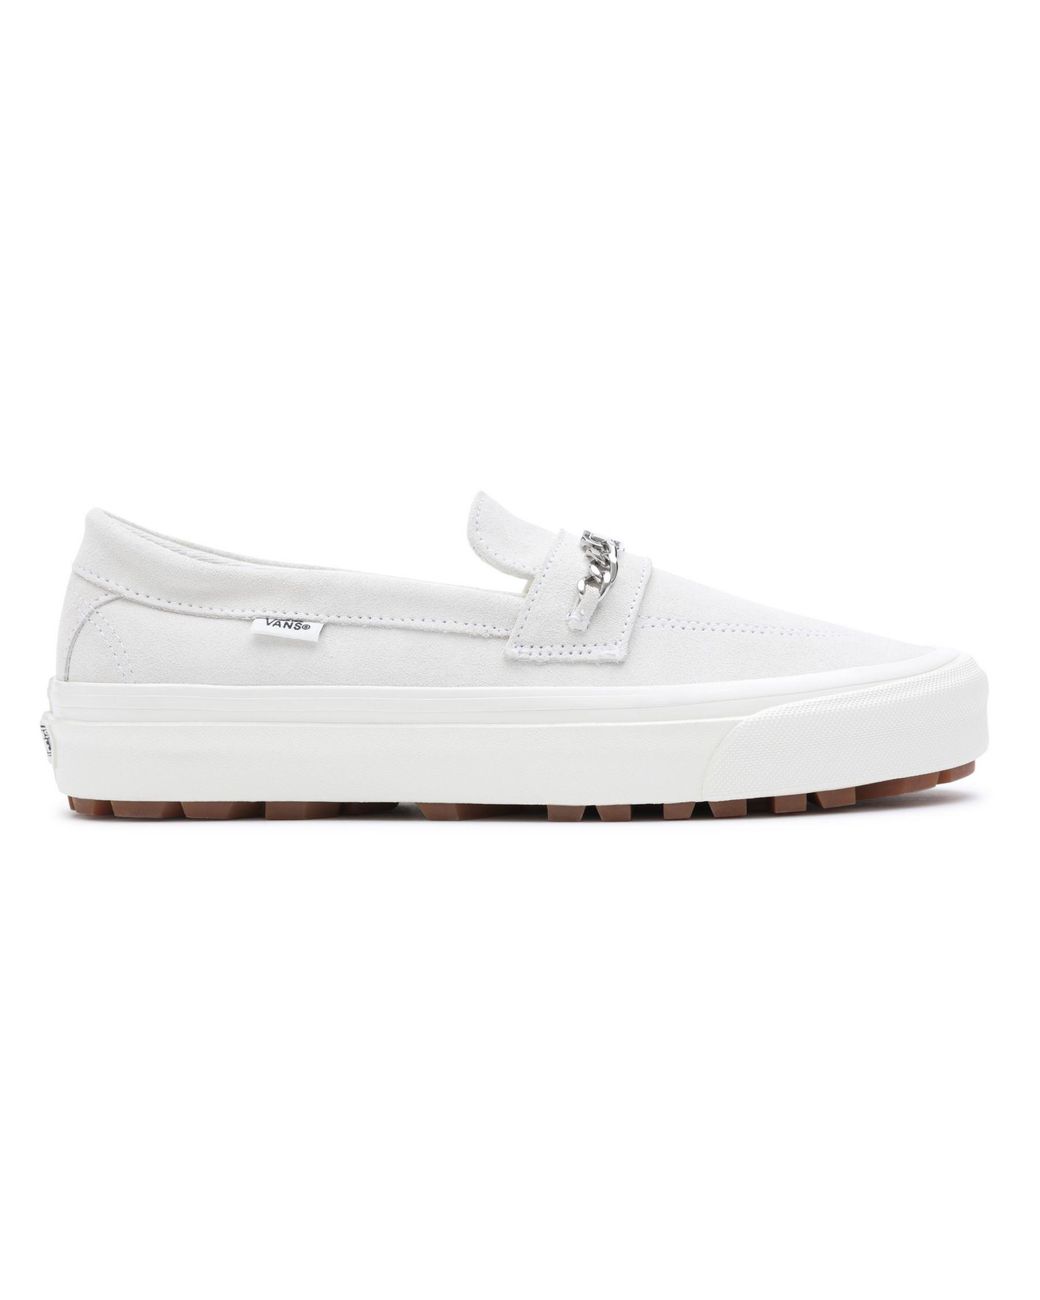 Vans Links Style 53 Dx Shoes in White | Lyst UK